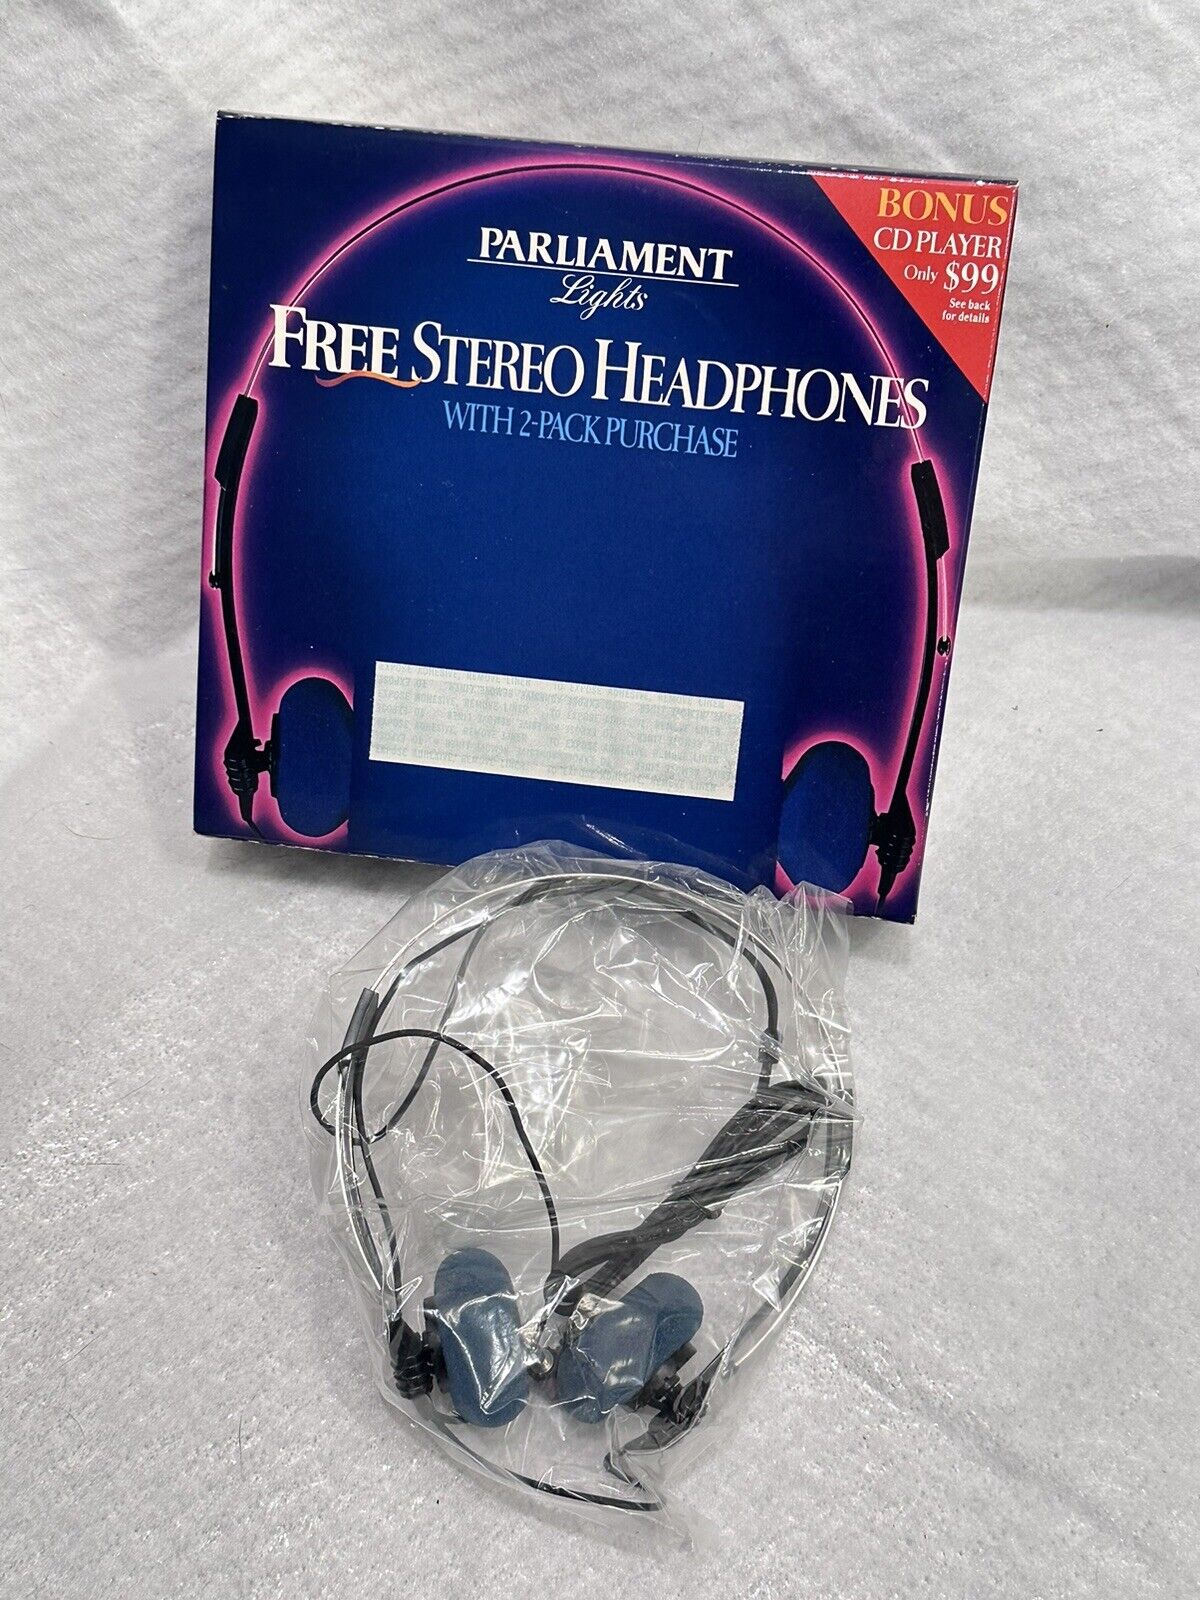 VINTAGE PARLIAMENT LIGHTS PROMOTIONAL STEREO HEADPHONES - NEW OLD STOCK